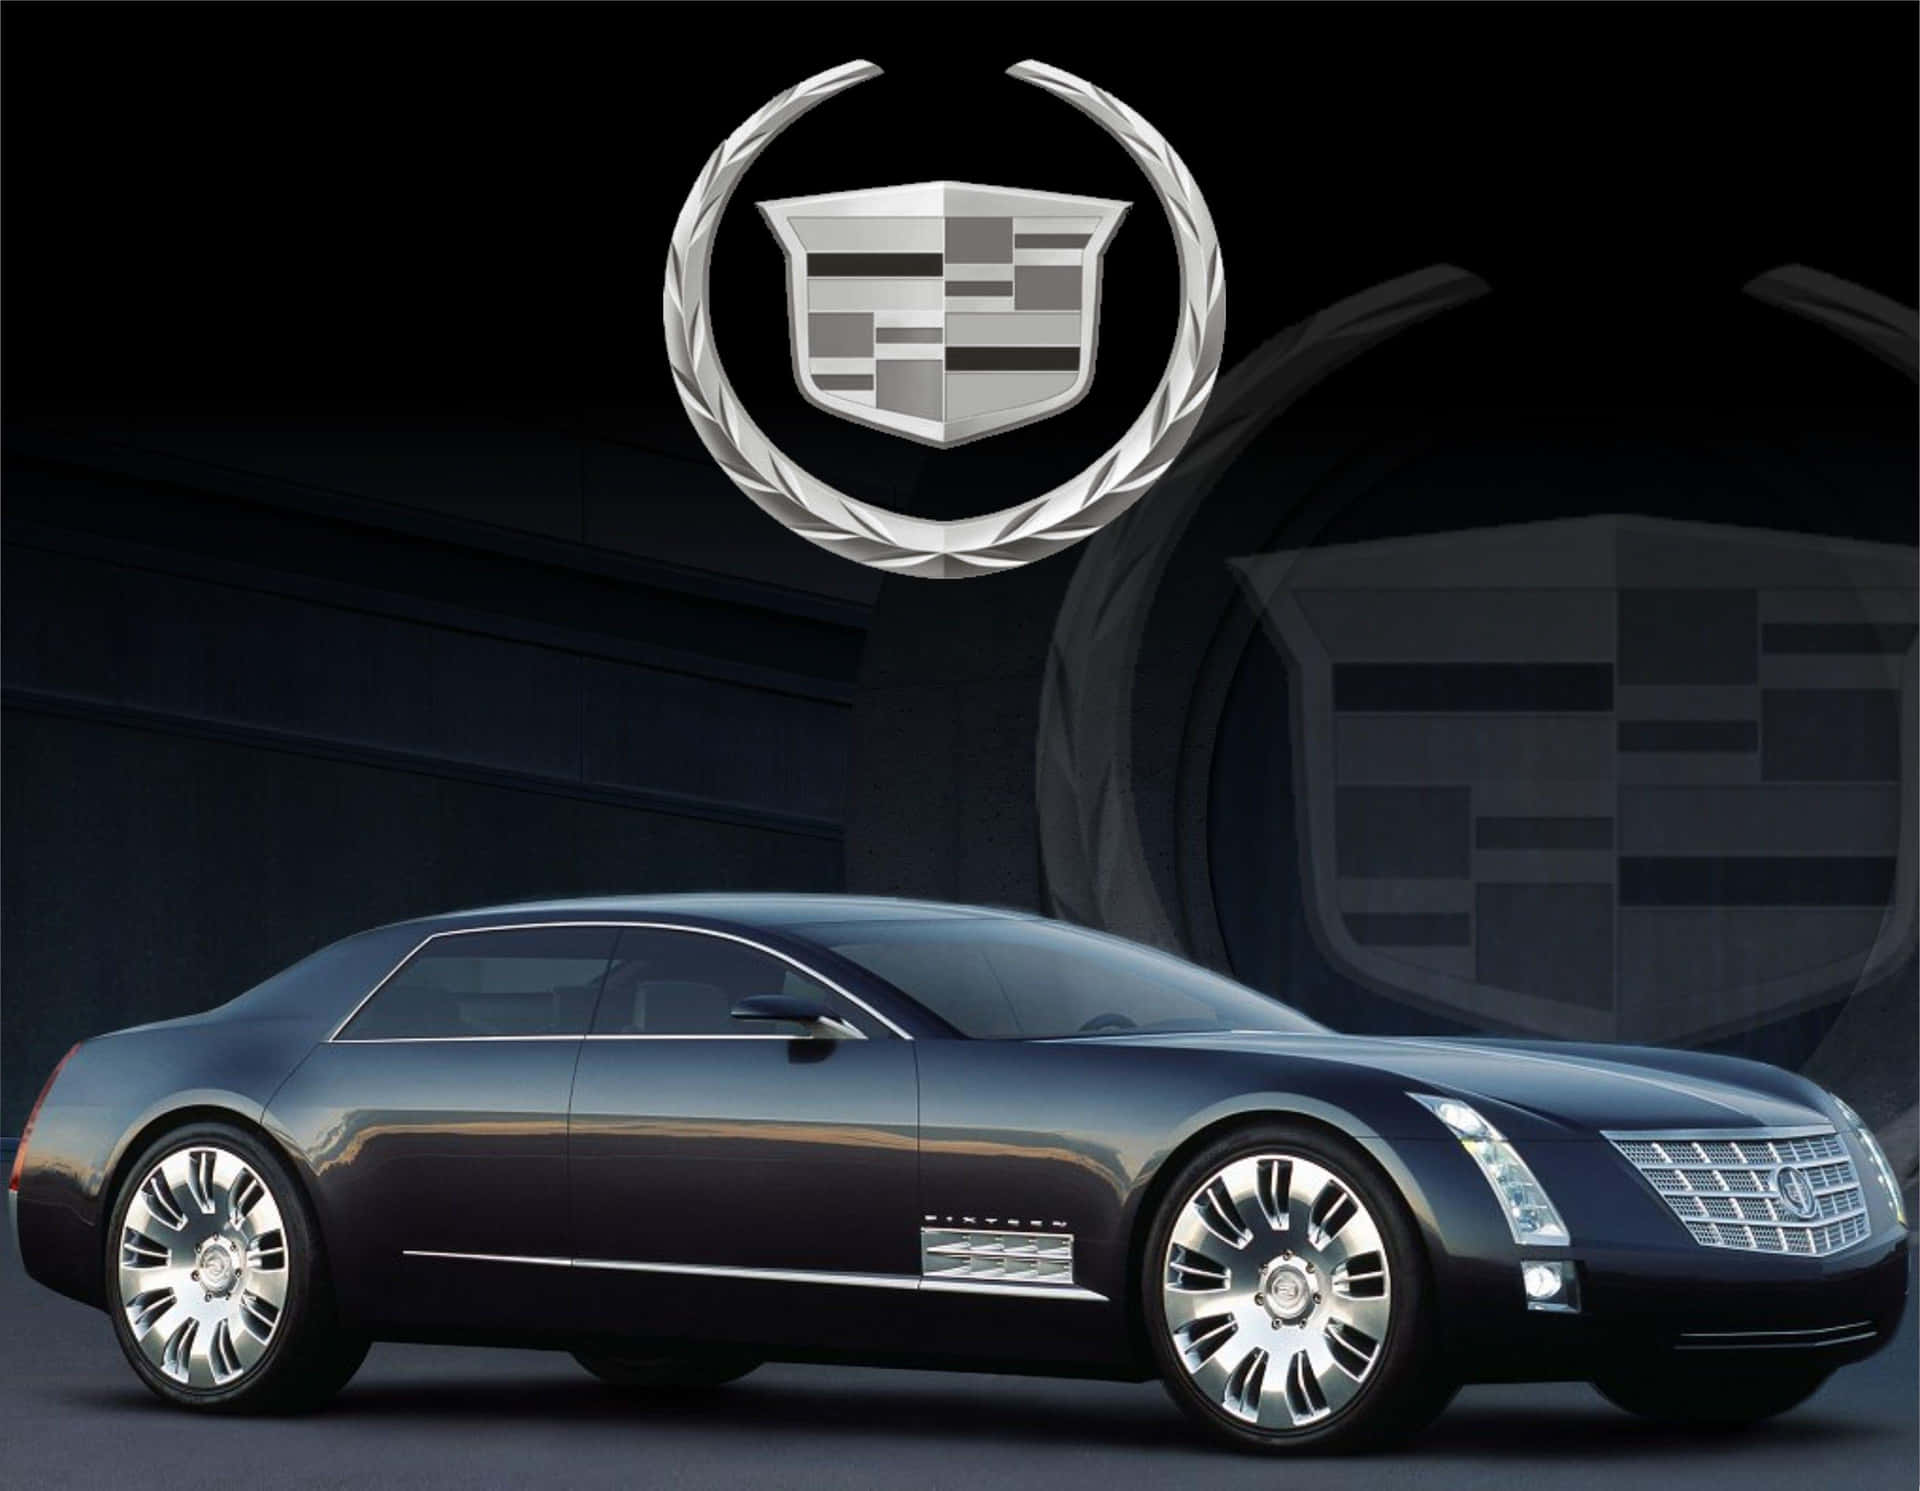 Exquisite, Iconic and Luxurious - The Alluring Cadillac